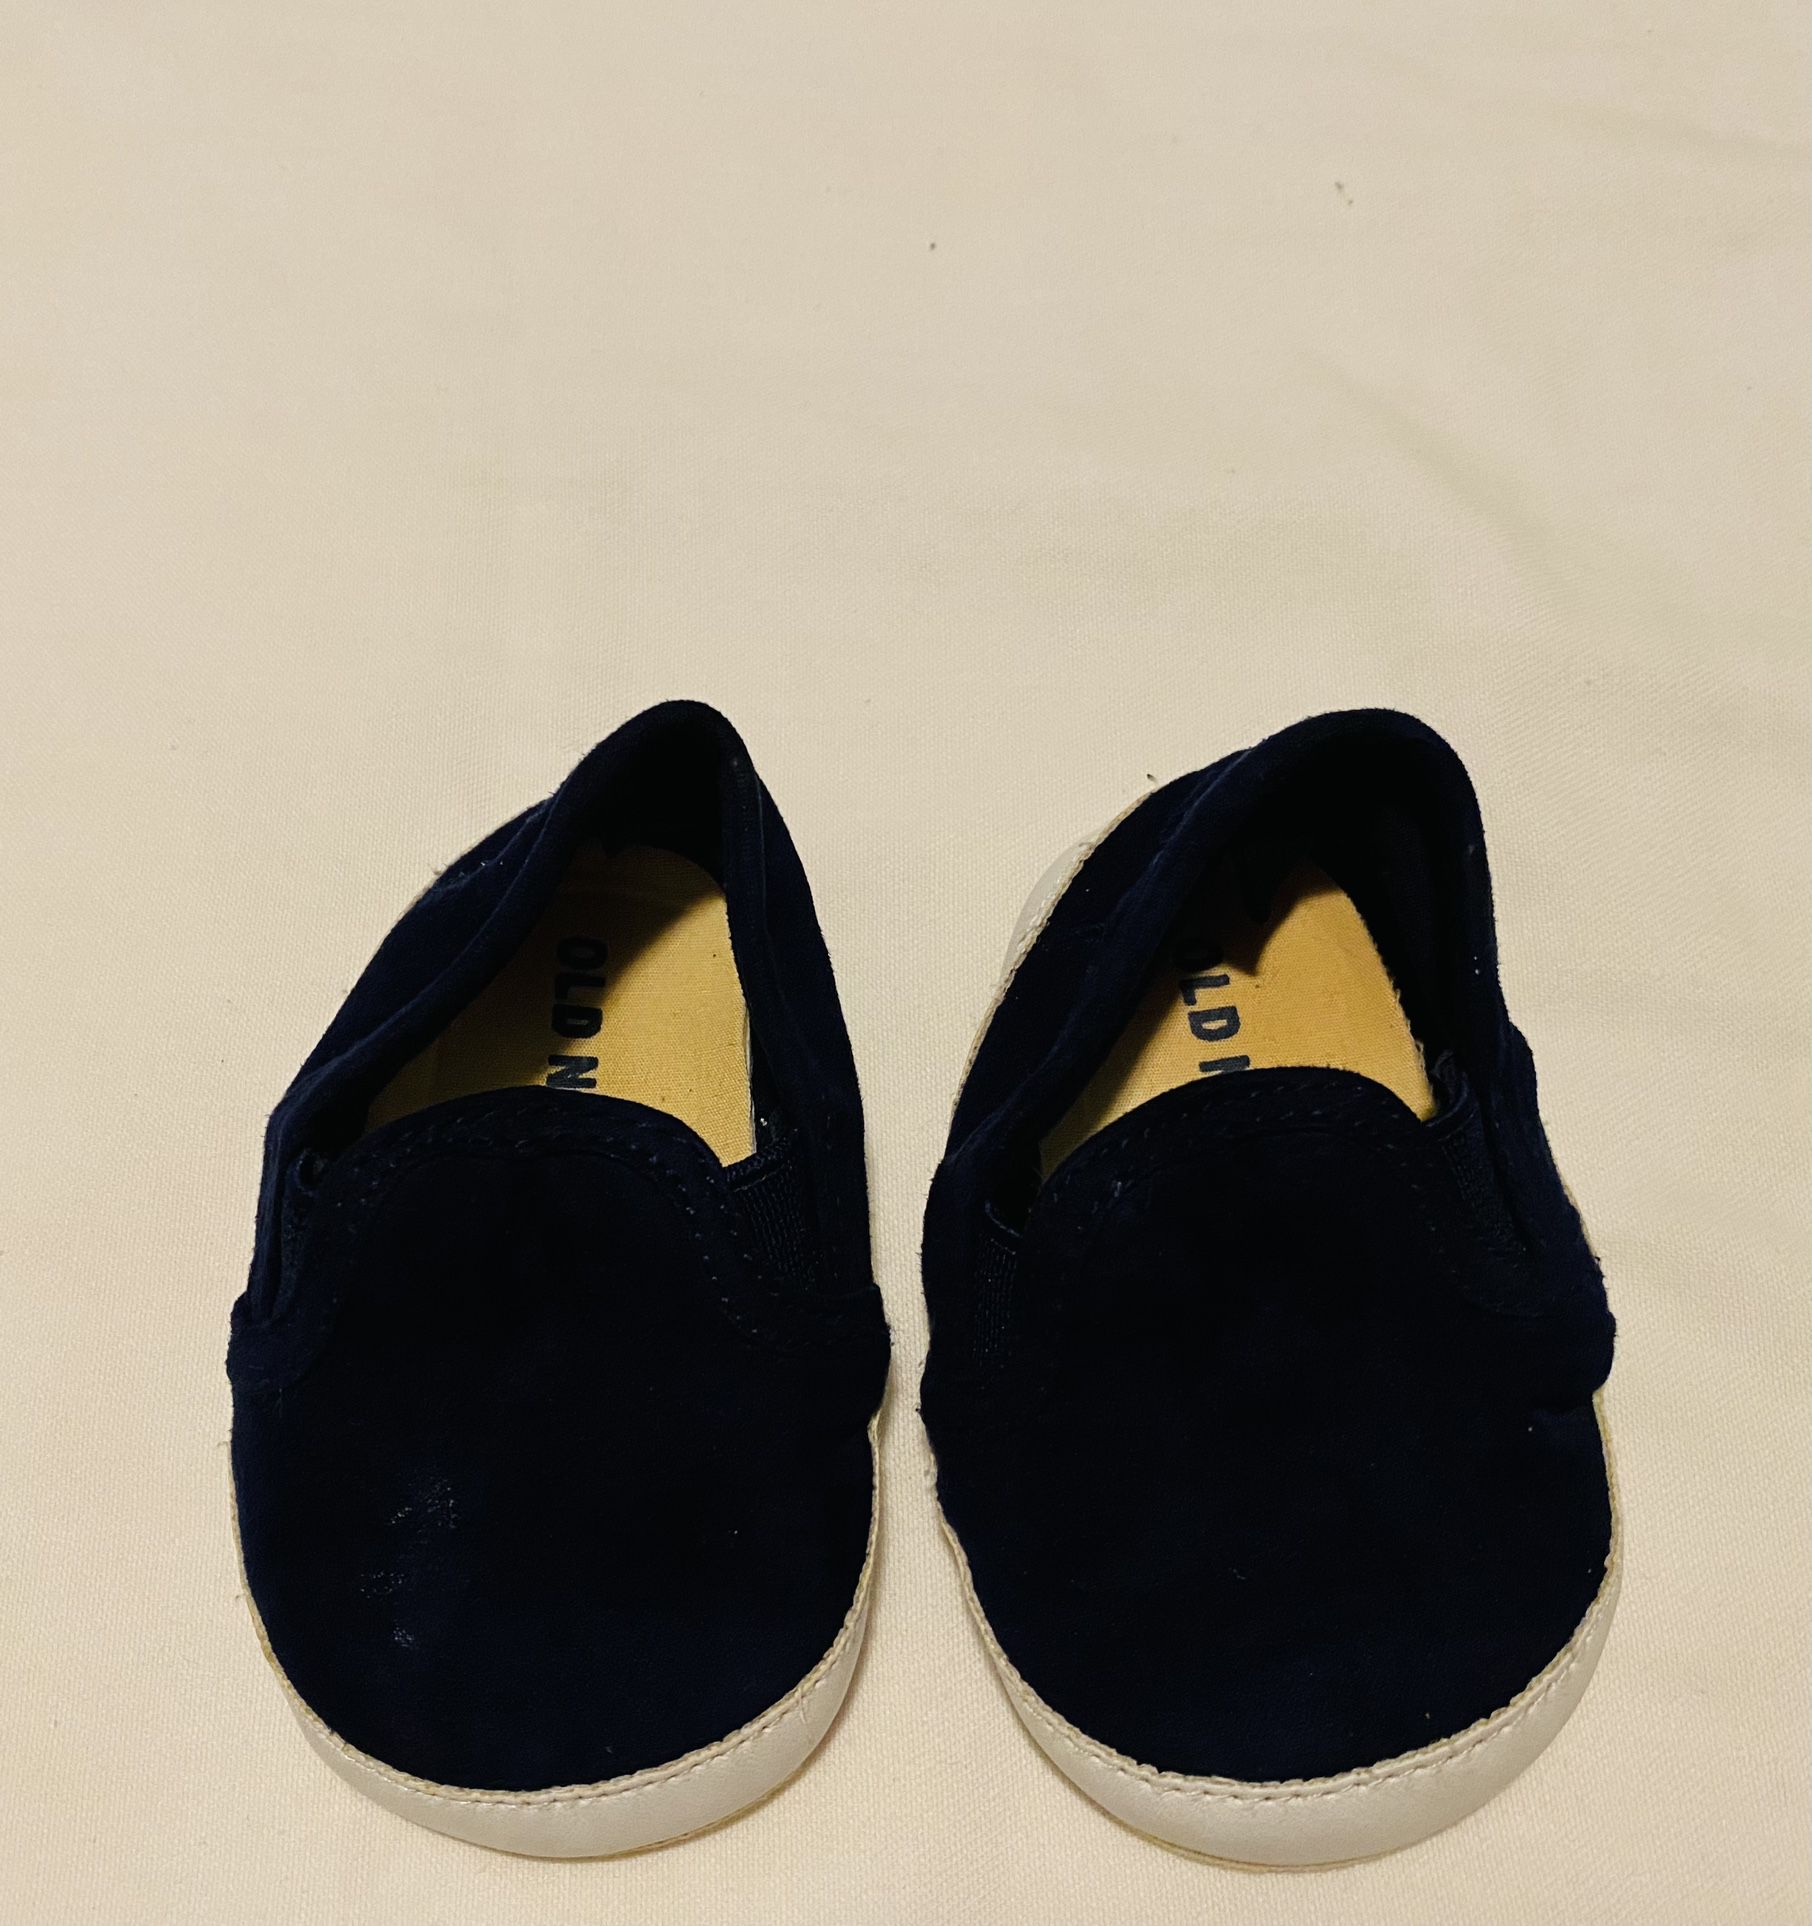 Four Pair Of Baby Shoes Size 0-3 Months for Sale in The Bronx, NY